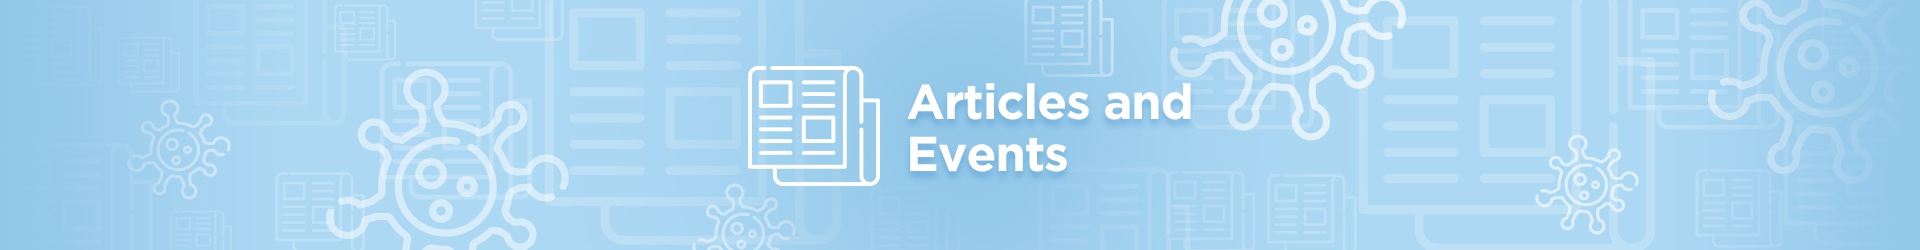 Articles and Events Inslider